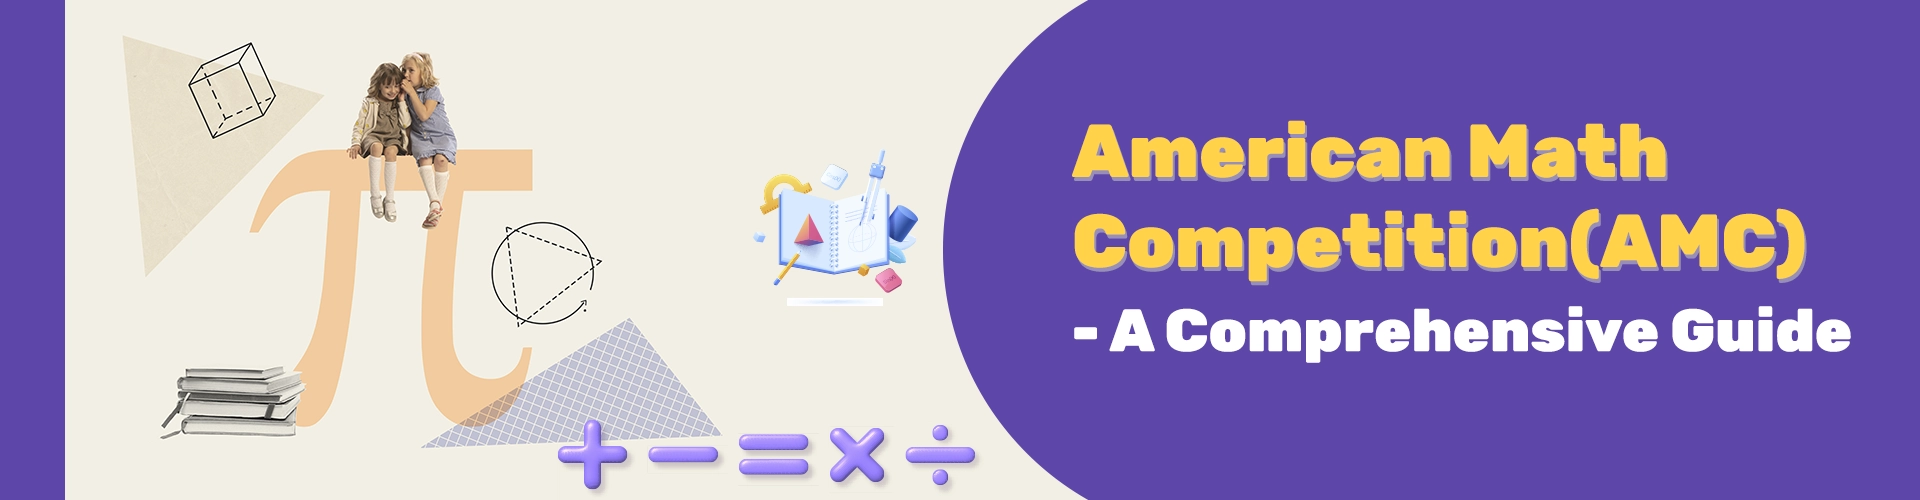 American Math Competition